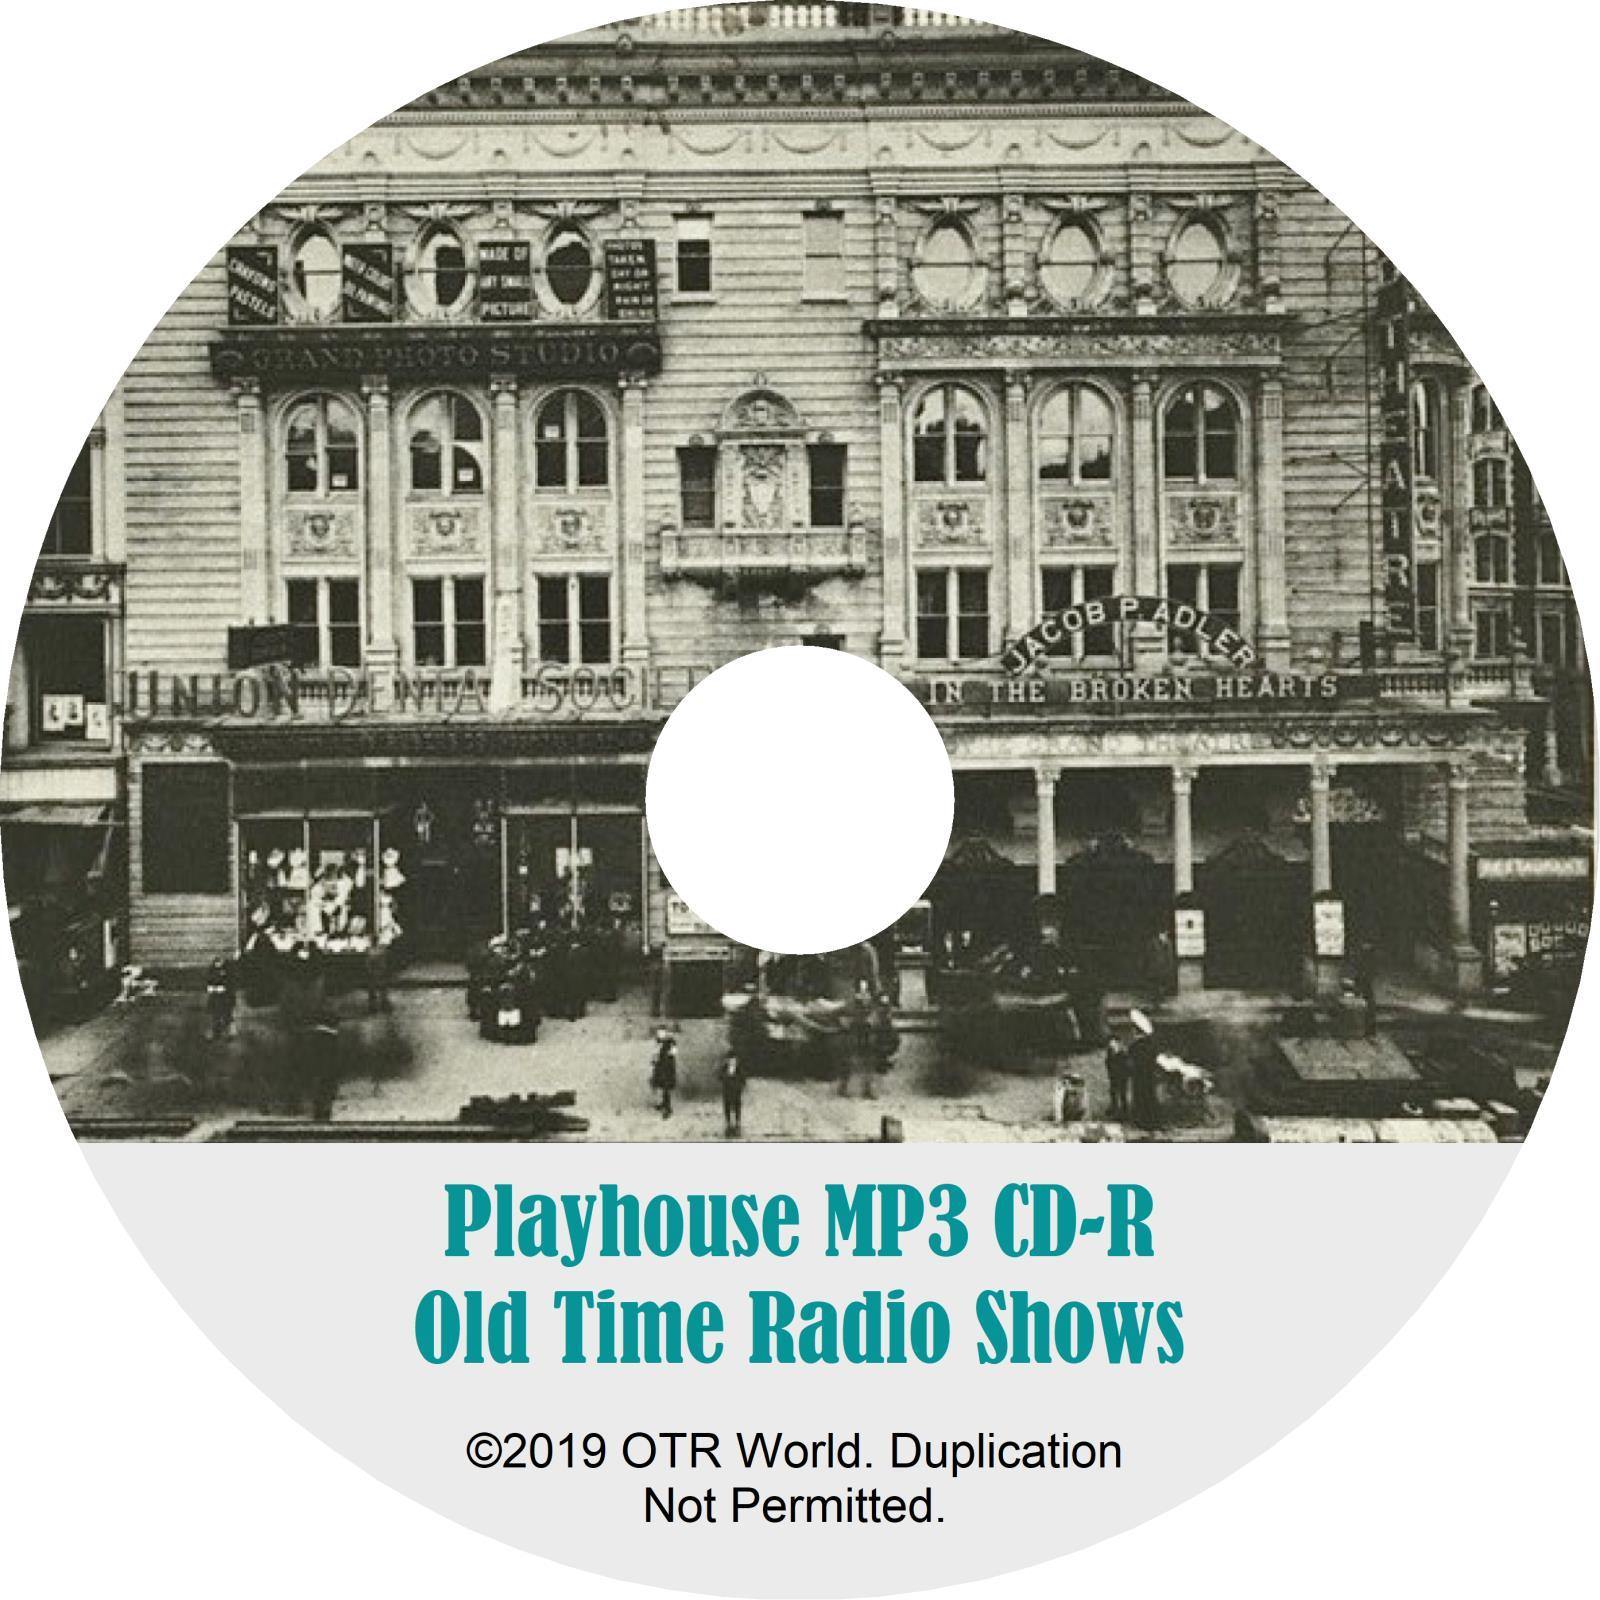 Playhouse OTR Old Time Radio Shows MP3 On CD 13 Episodes - OTR World